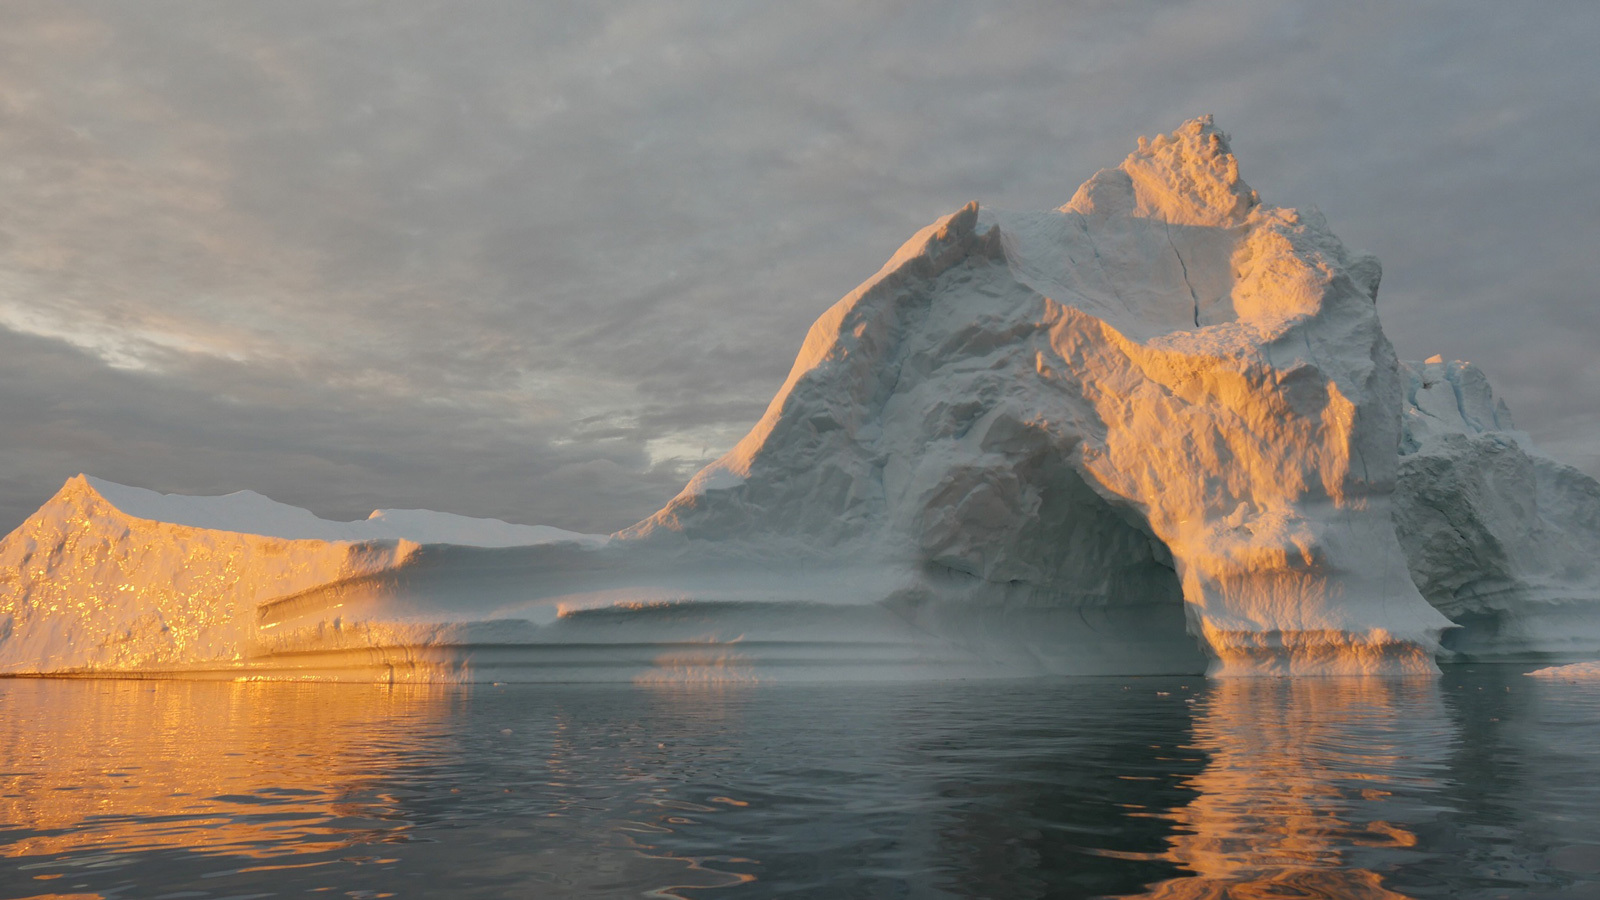 An iceberg in Disko Bay, near Ilulissat, Greenland. The massive Greenland ice sheet shed a record amount of ice in 2019, ending a brief period of more moderate ice loss. Credit: NASA/Saskia Madlene